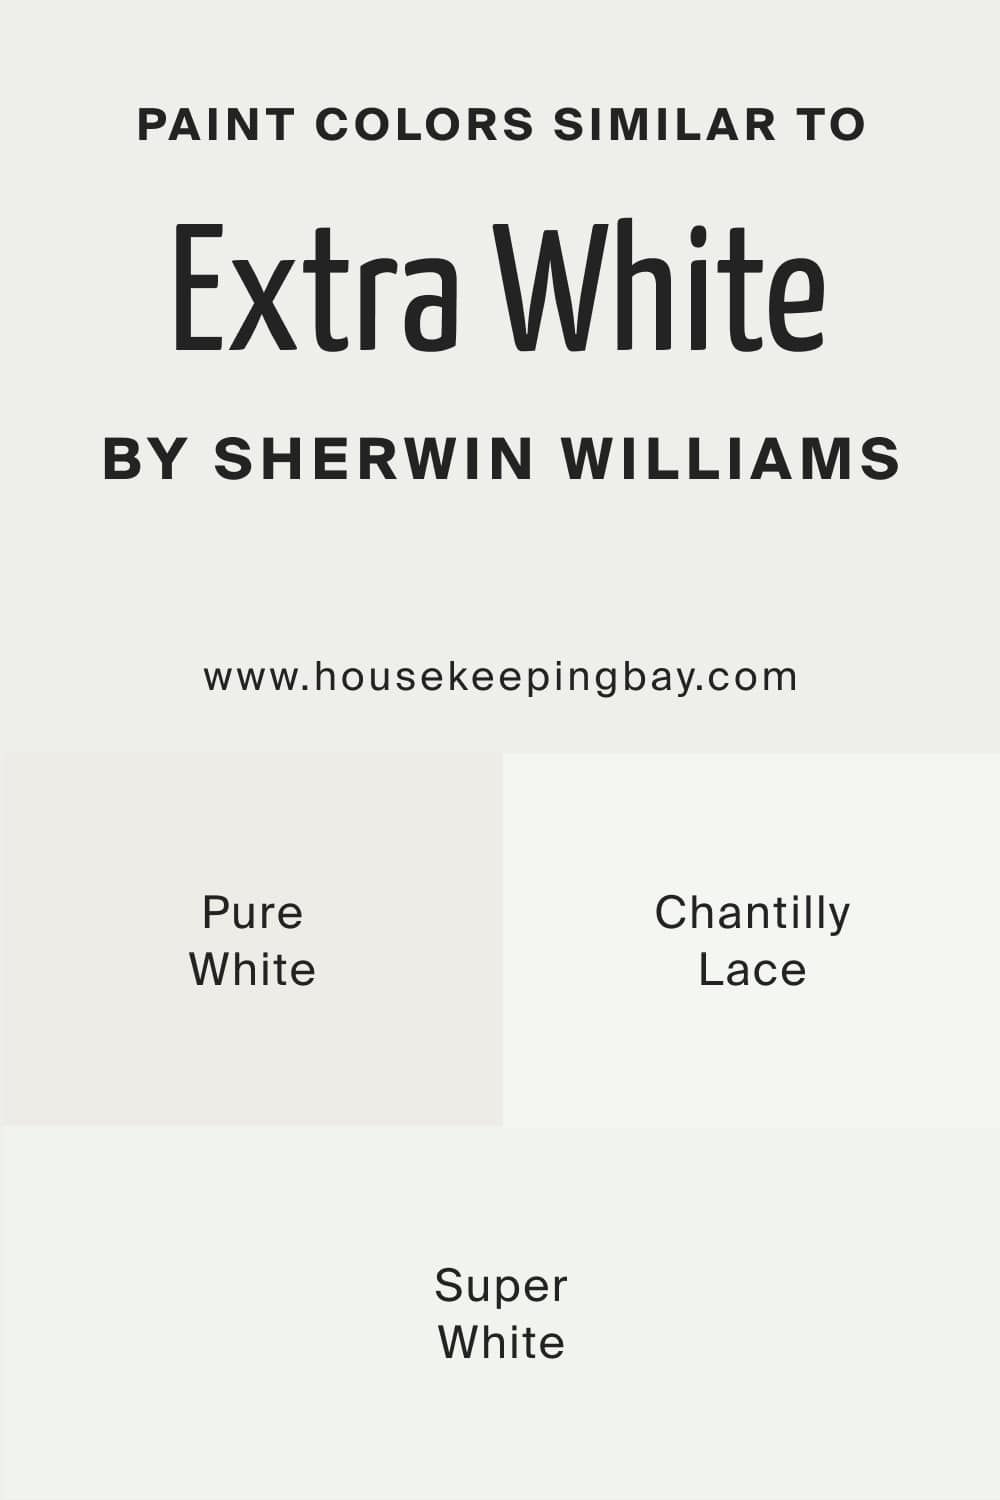 Paint Colors Similar to Extra White SW 7006 by Sherwin Williams